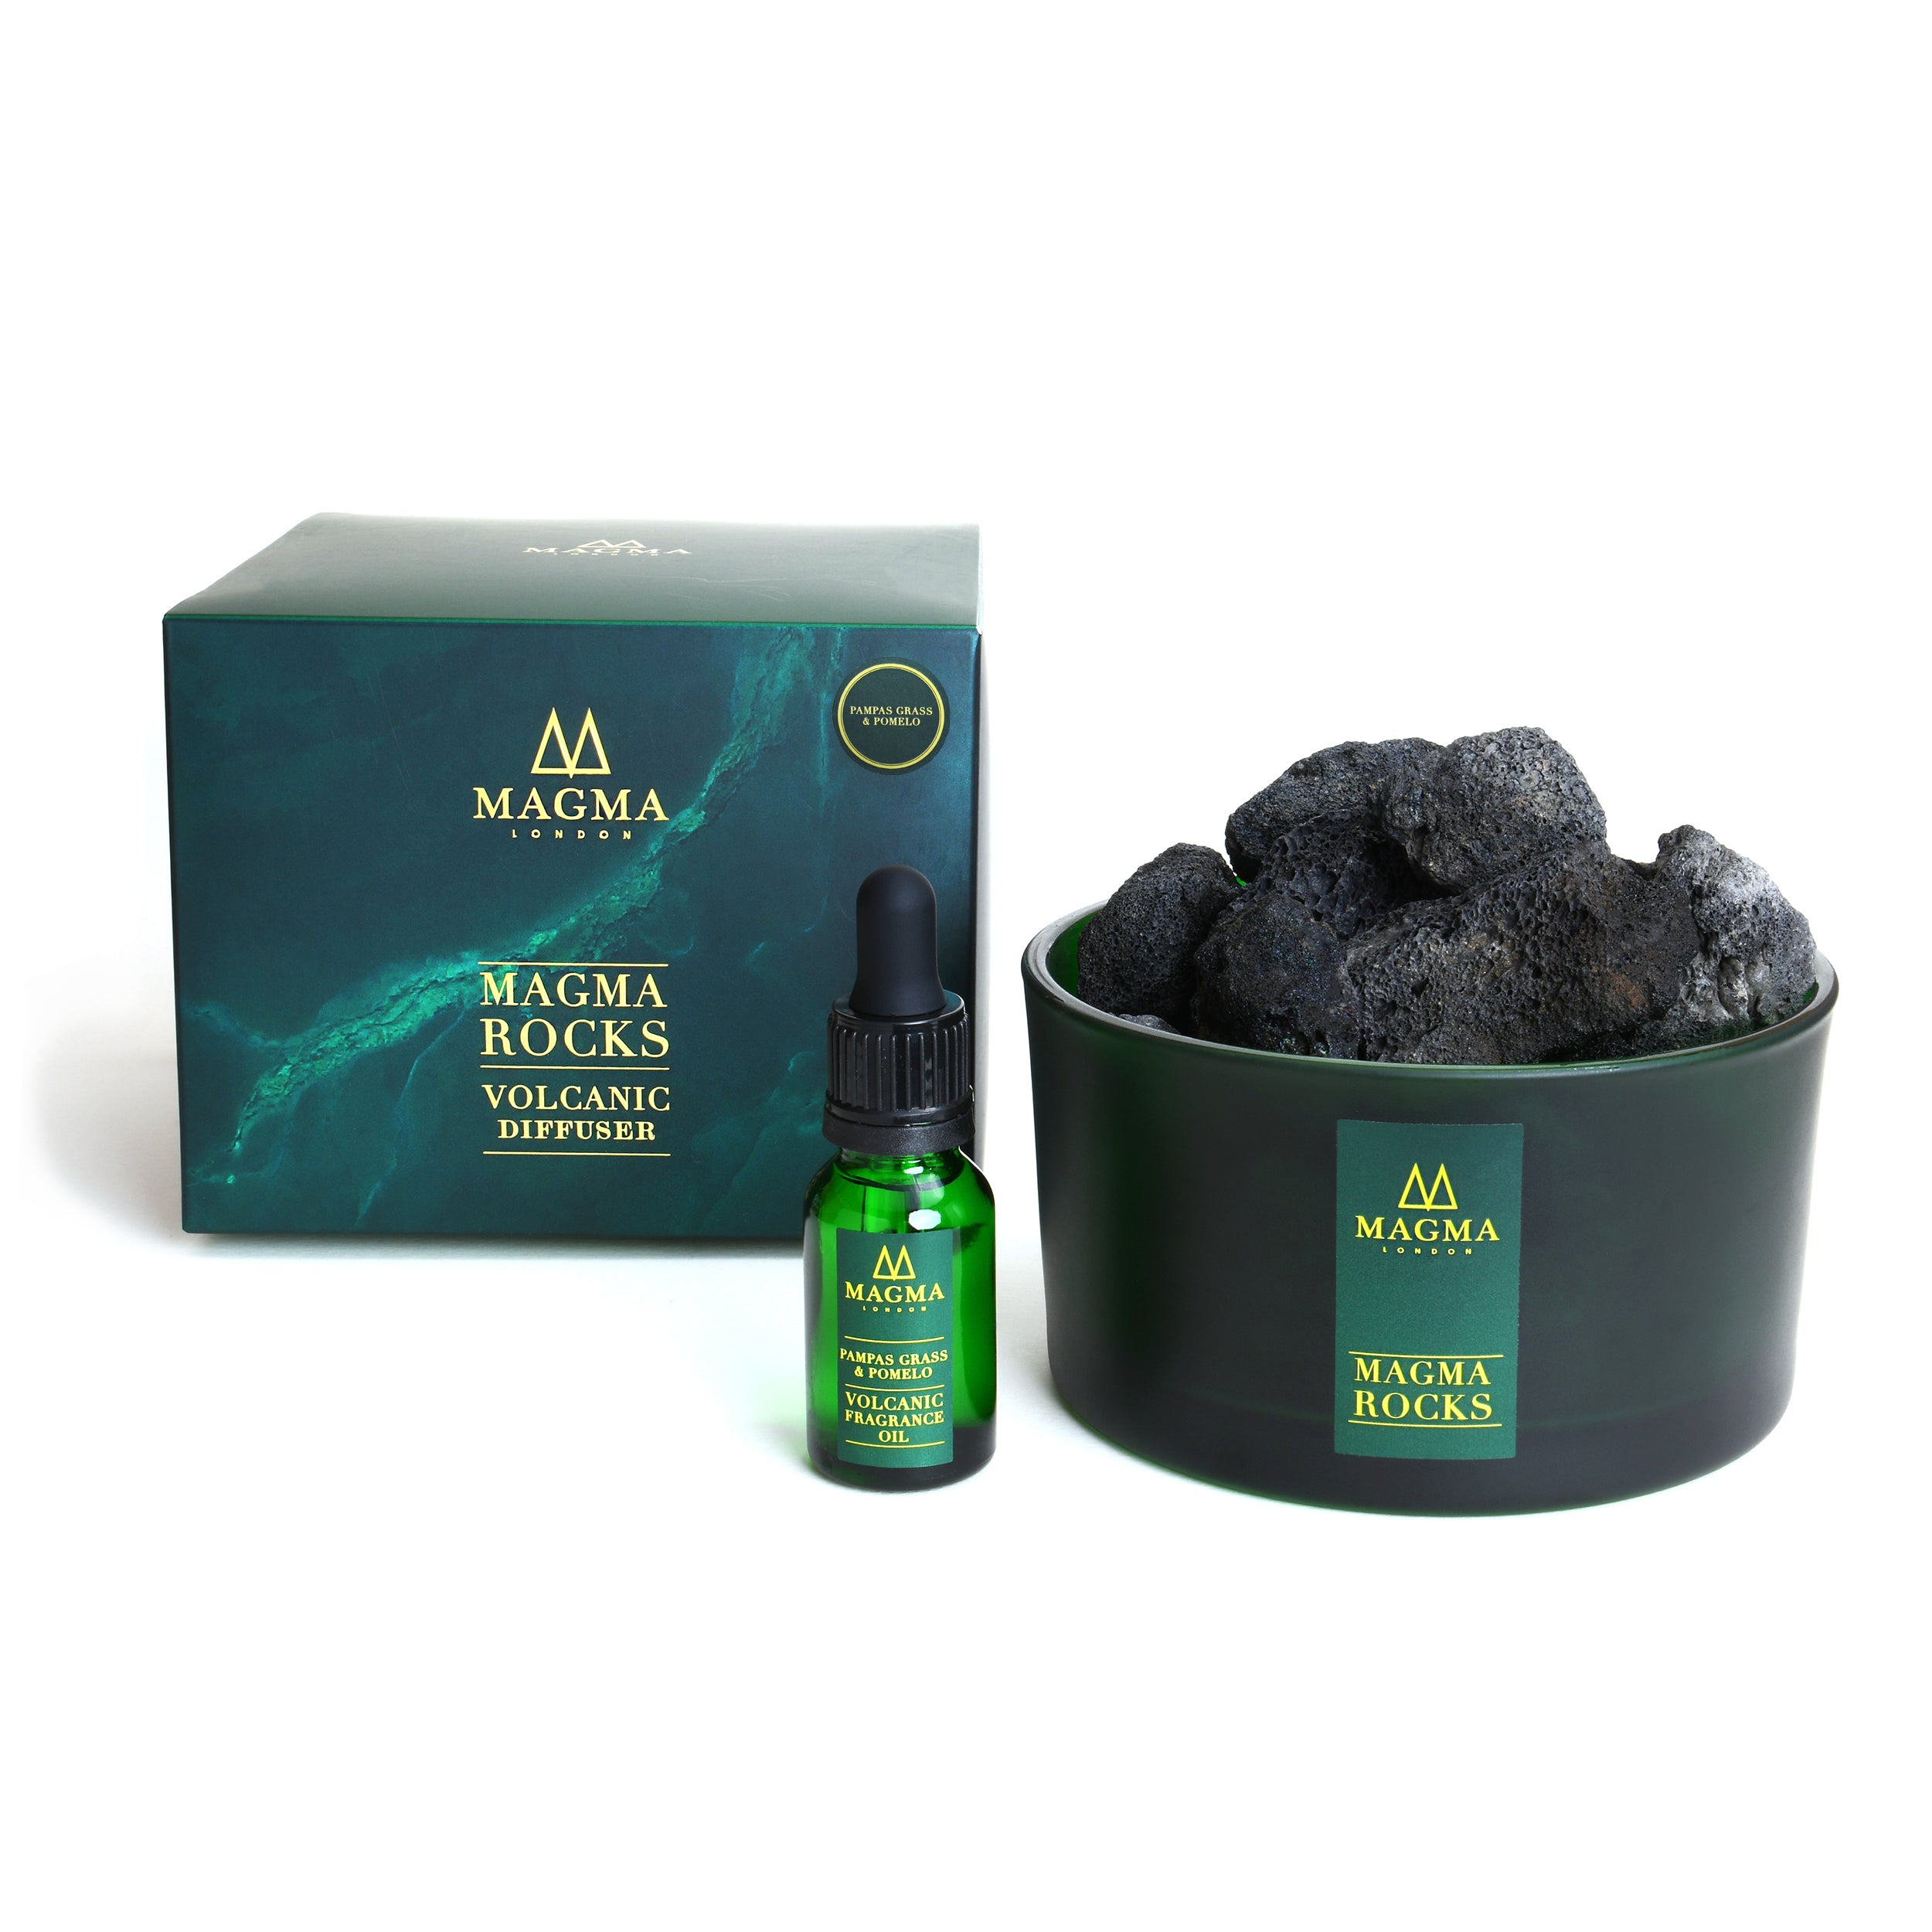 Magma London Pampas Grass and Pomelo Volcanic Rock Diffuser